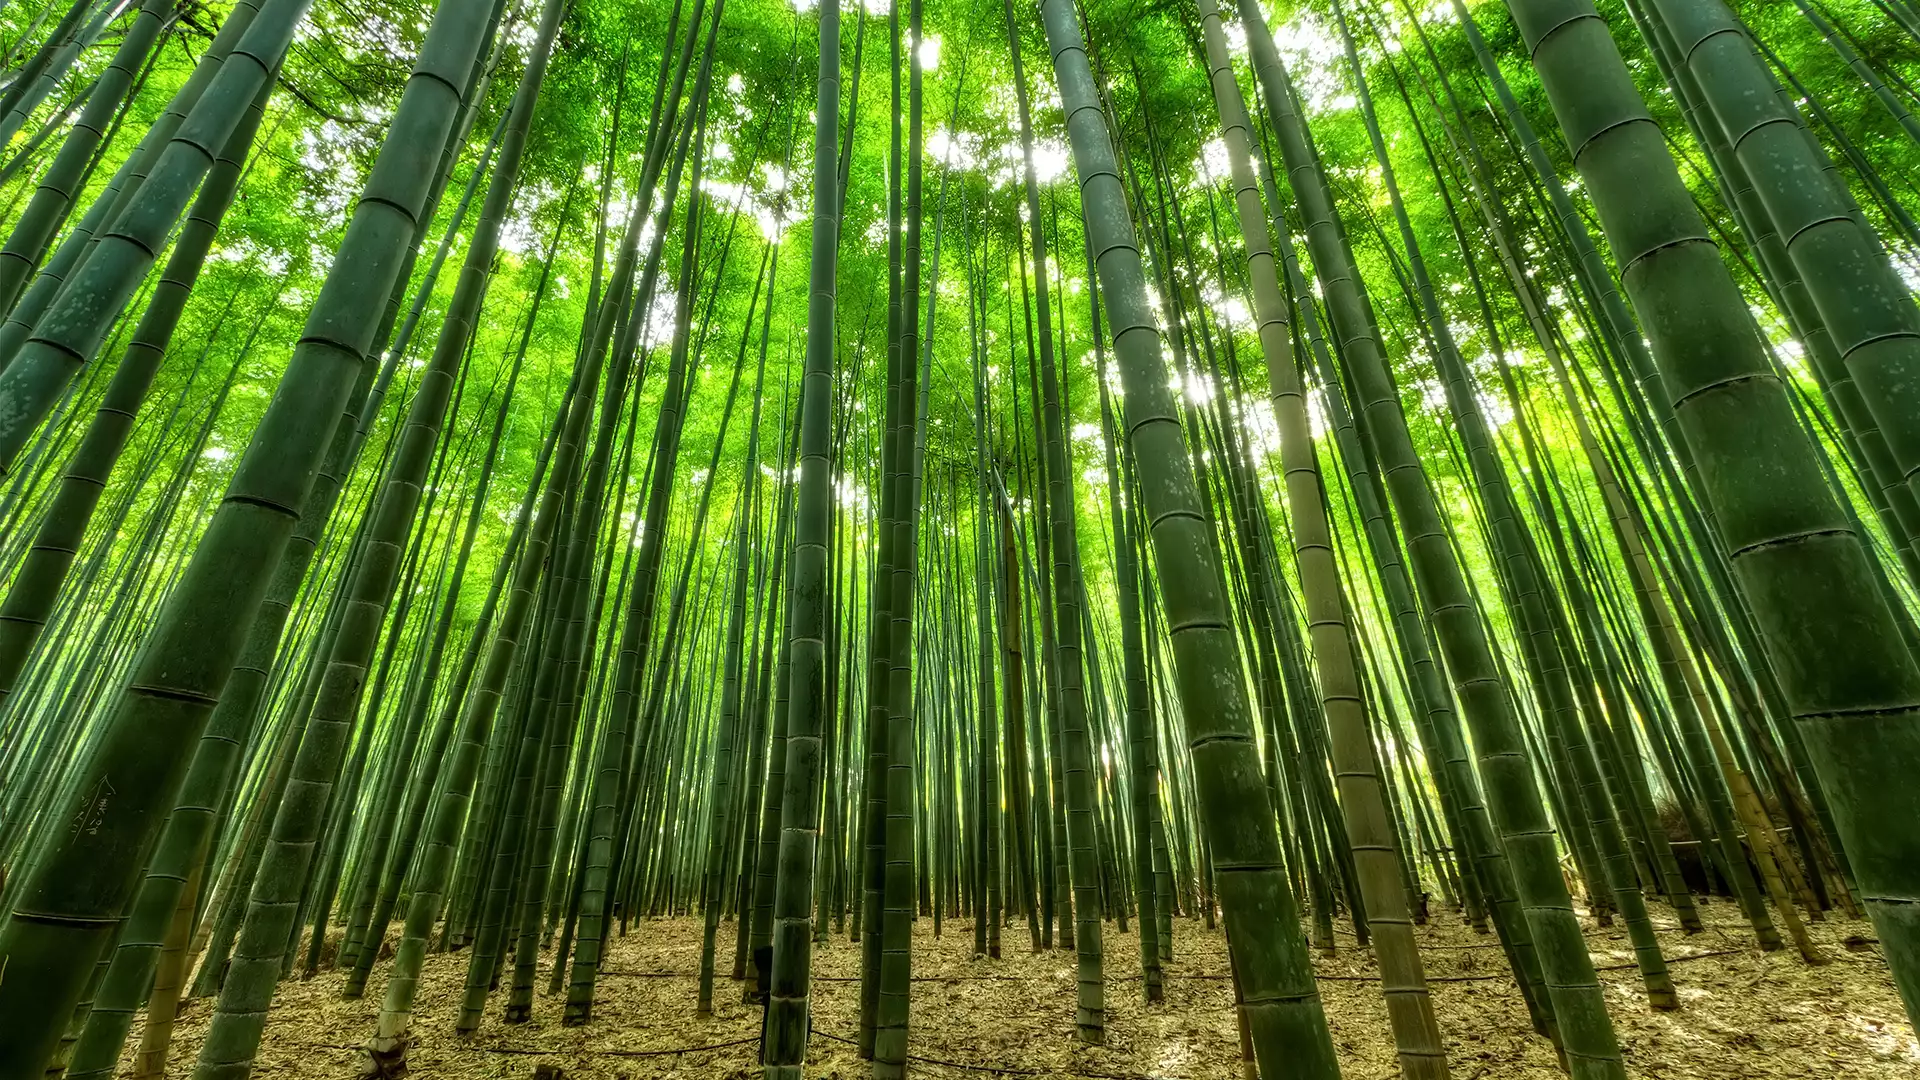 A forest of bamboo trees